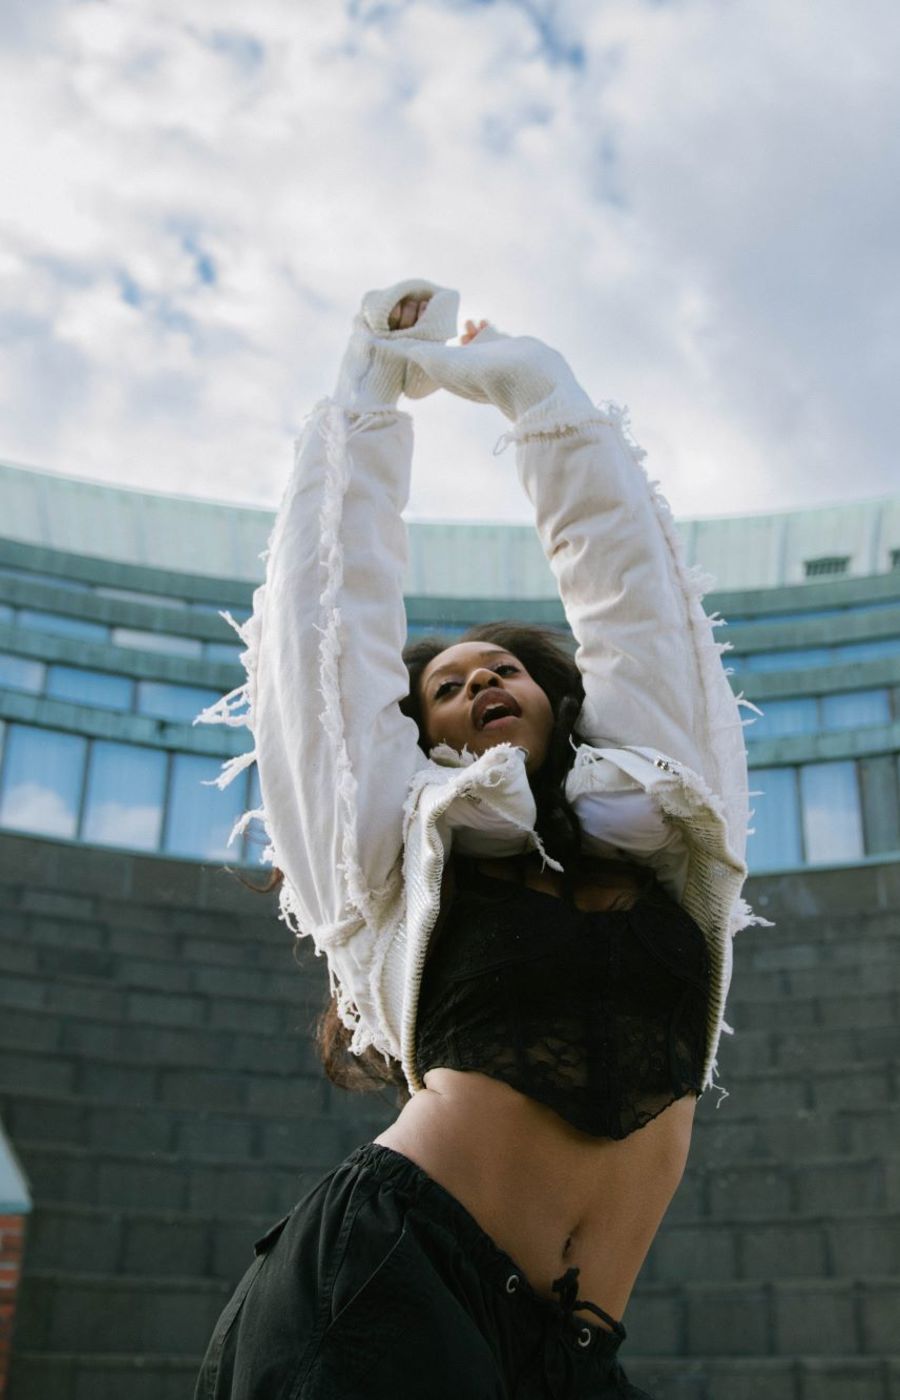 A woman dancing in front of a big building